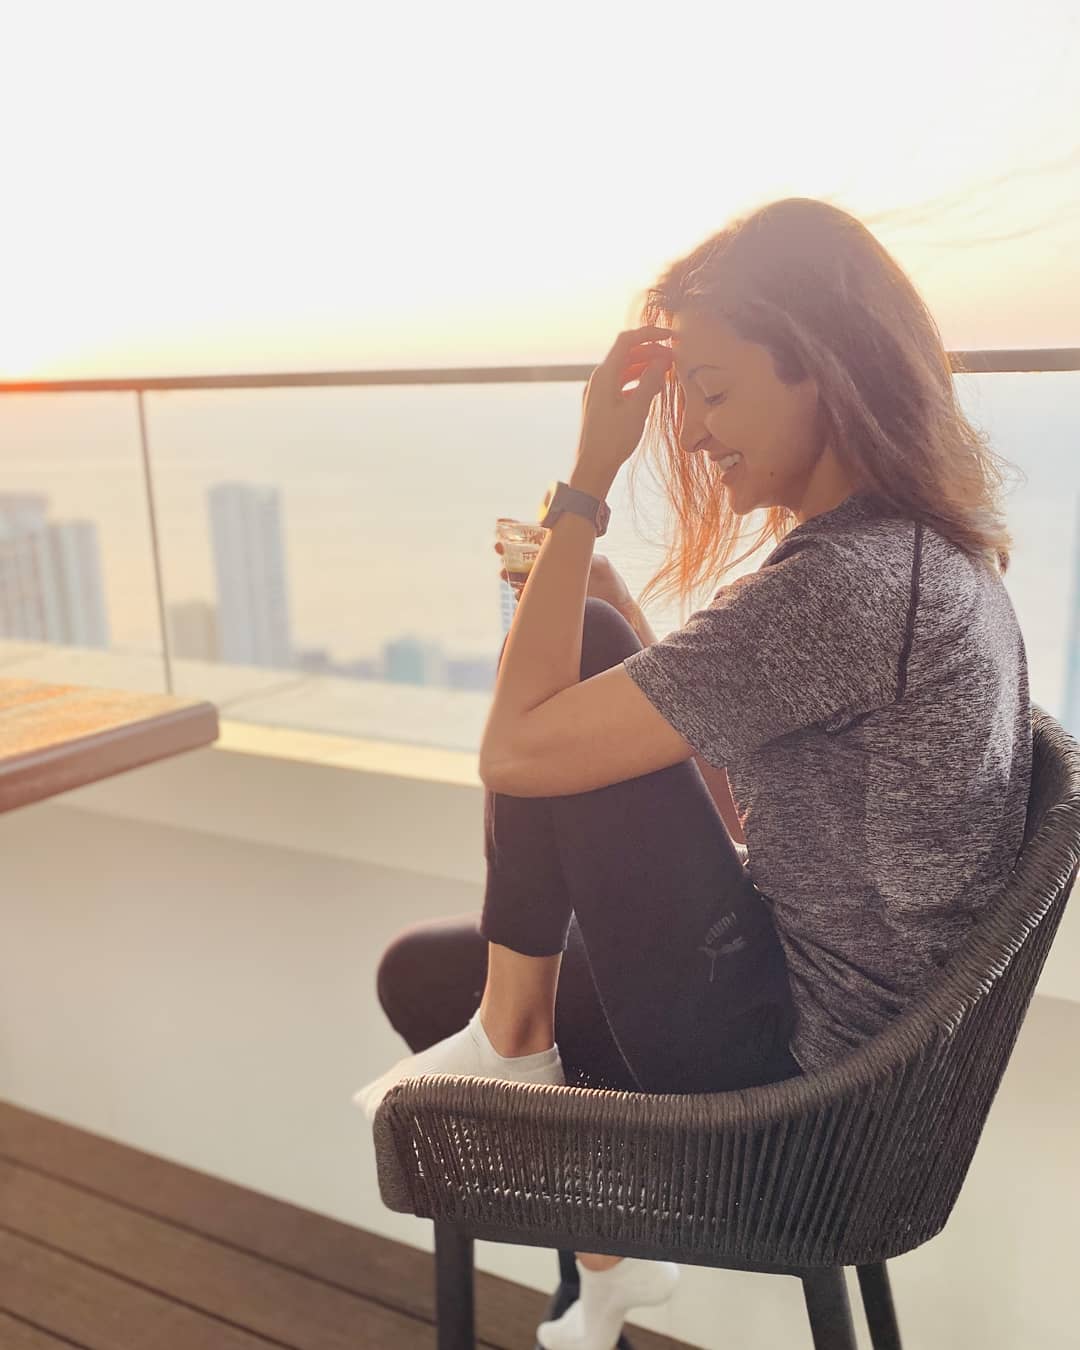  Anushka Sharma keeps it simple in a loose tee and trackpants. (Image: Instagram)